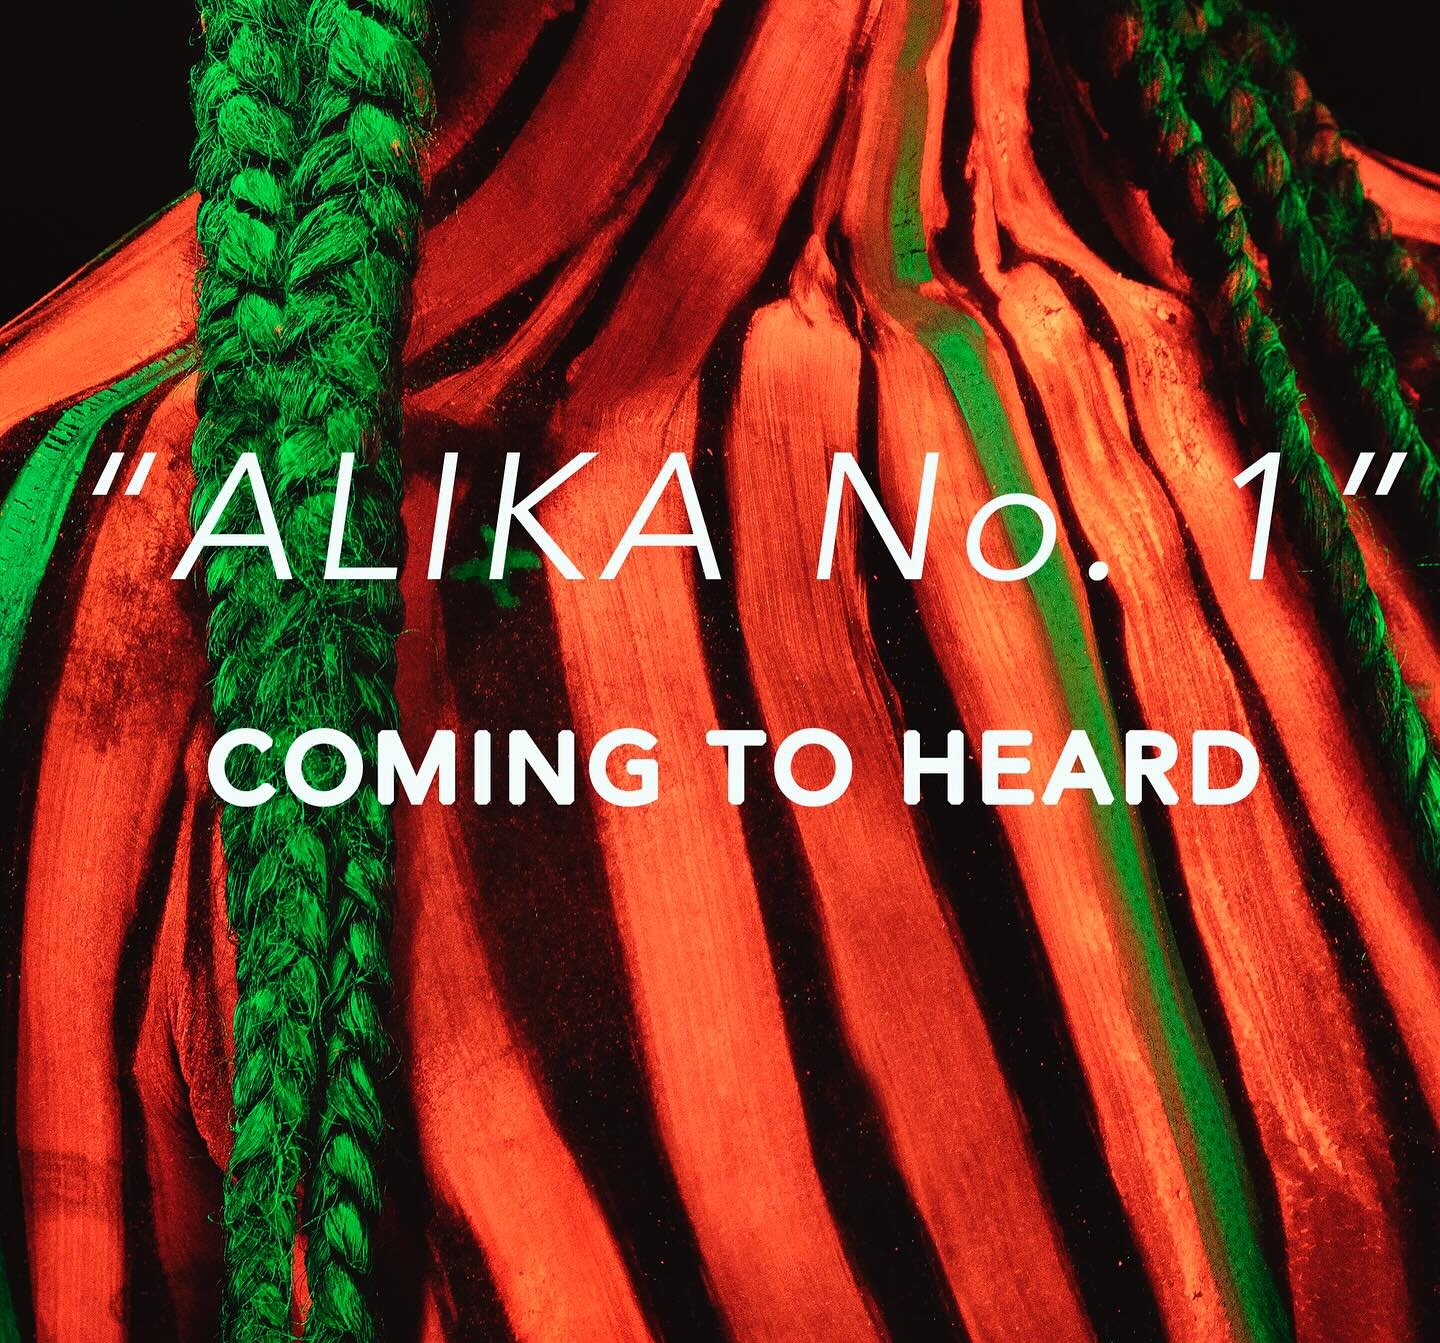 New series: &ldquo;Alika No. 1&rdquo;
and &ldquo;No. 2&rdquo; coming to the Heard Museum Indian Fair &amp; Market this weekend. Find me with my fam at B-1 (NEW booth location) in Phoenix this weekend with new works in the Indigenous Futurity series. 